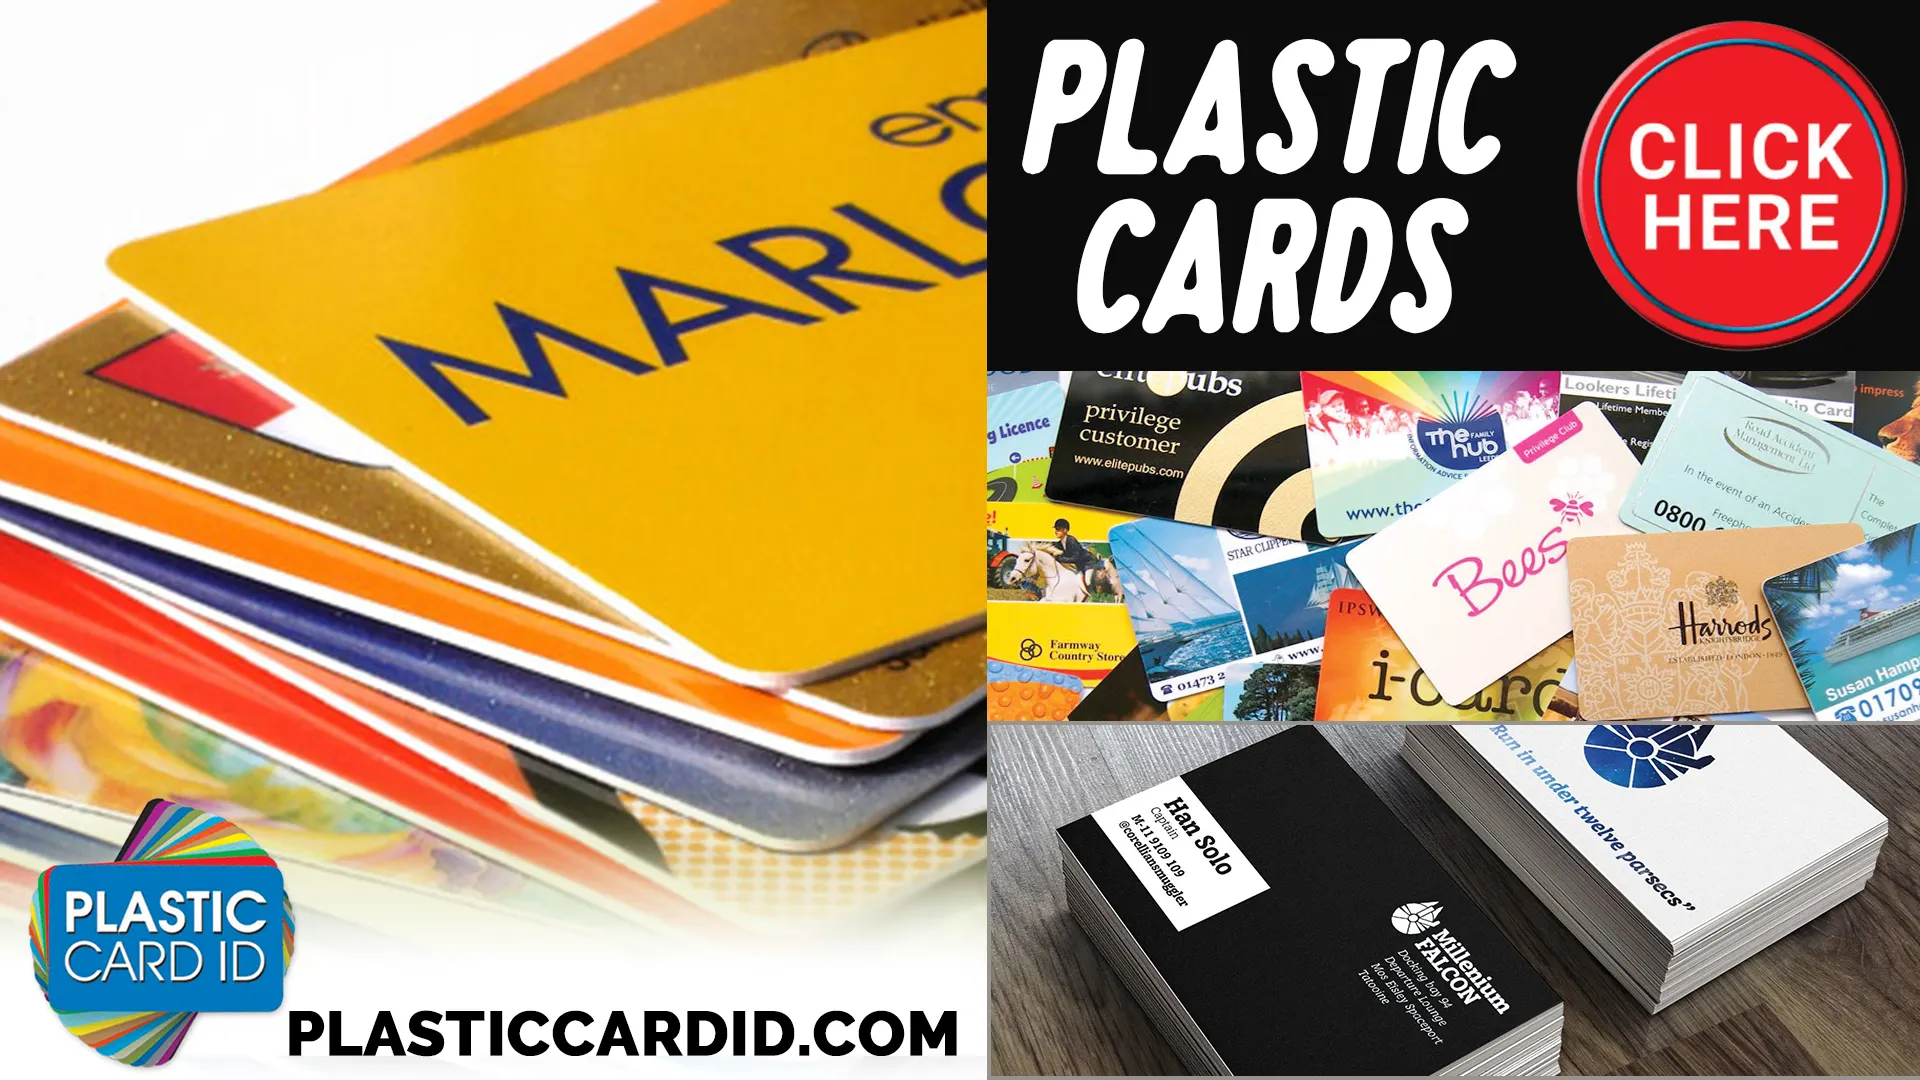 Welcome to the World of Enhanced Durability with Our Wear-Resistant Coatings for Plastic Cards